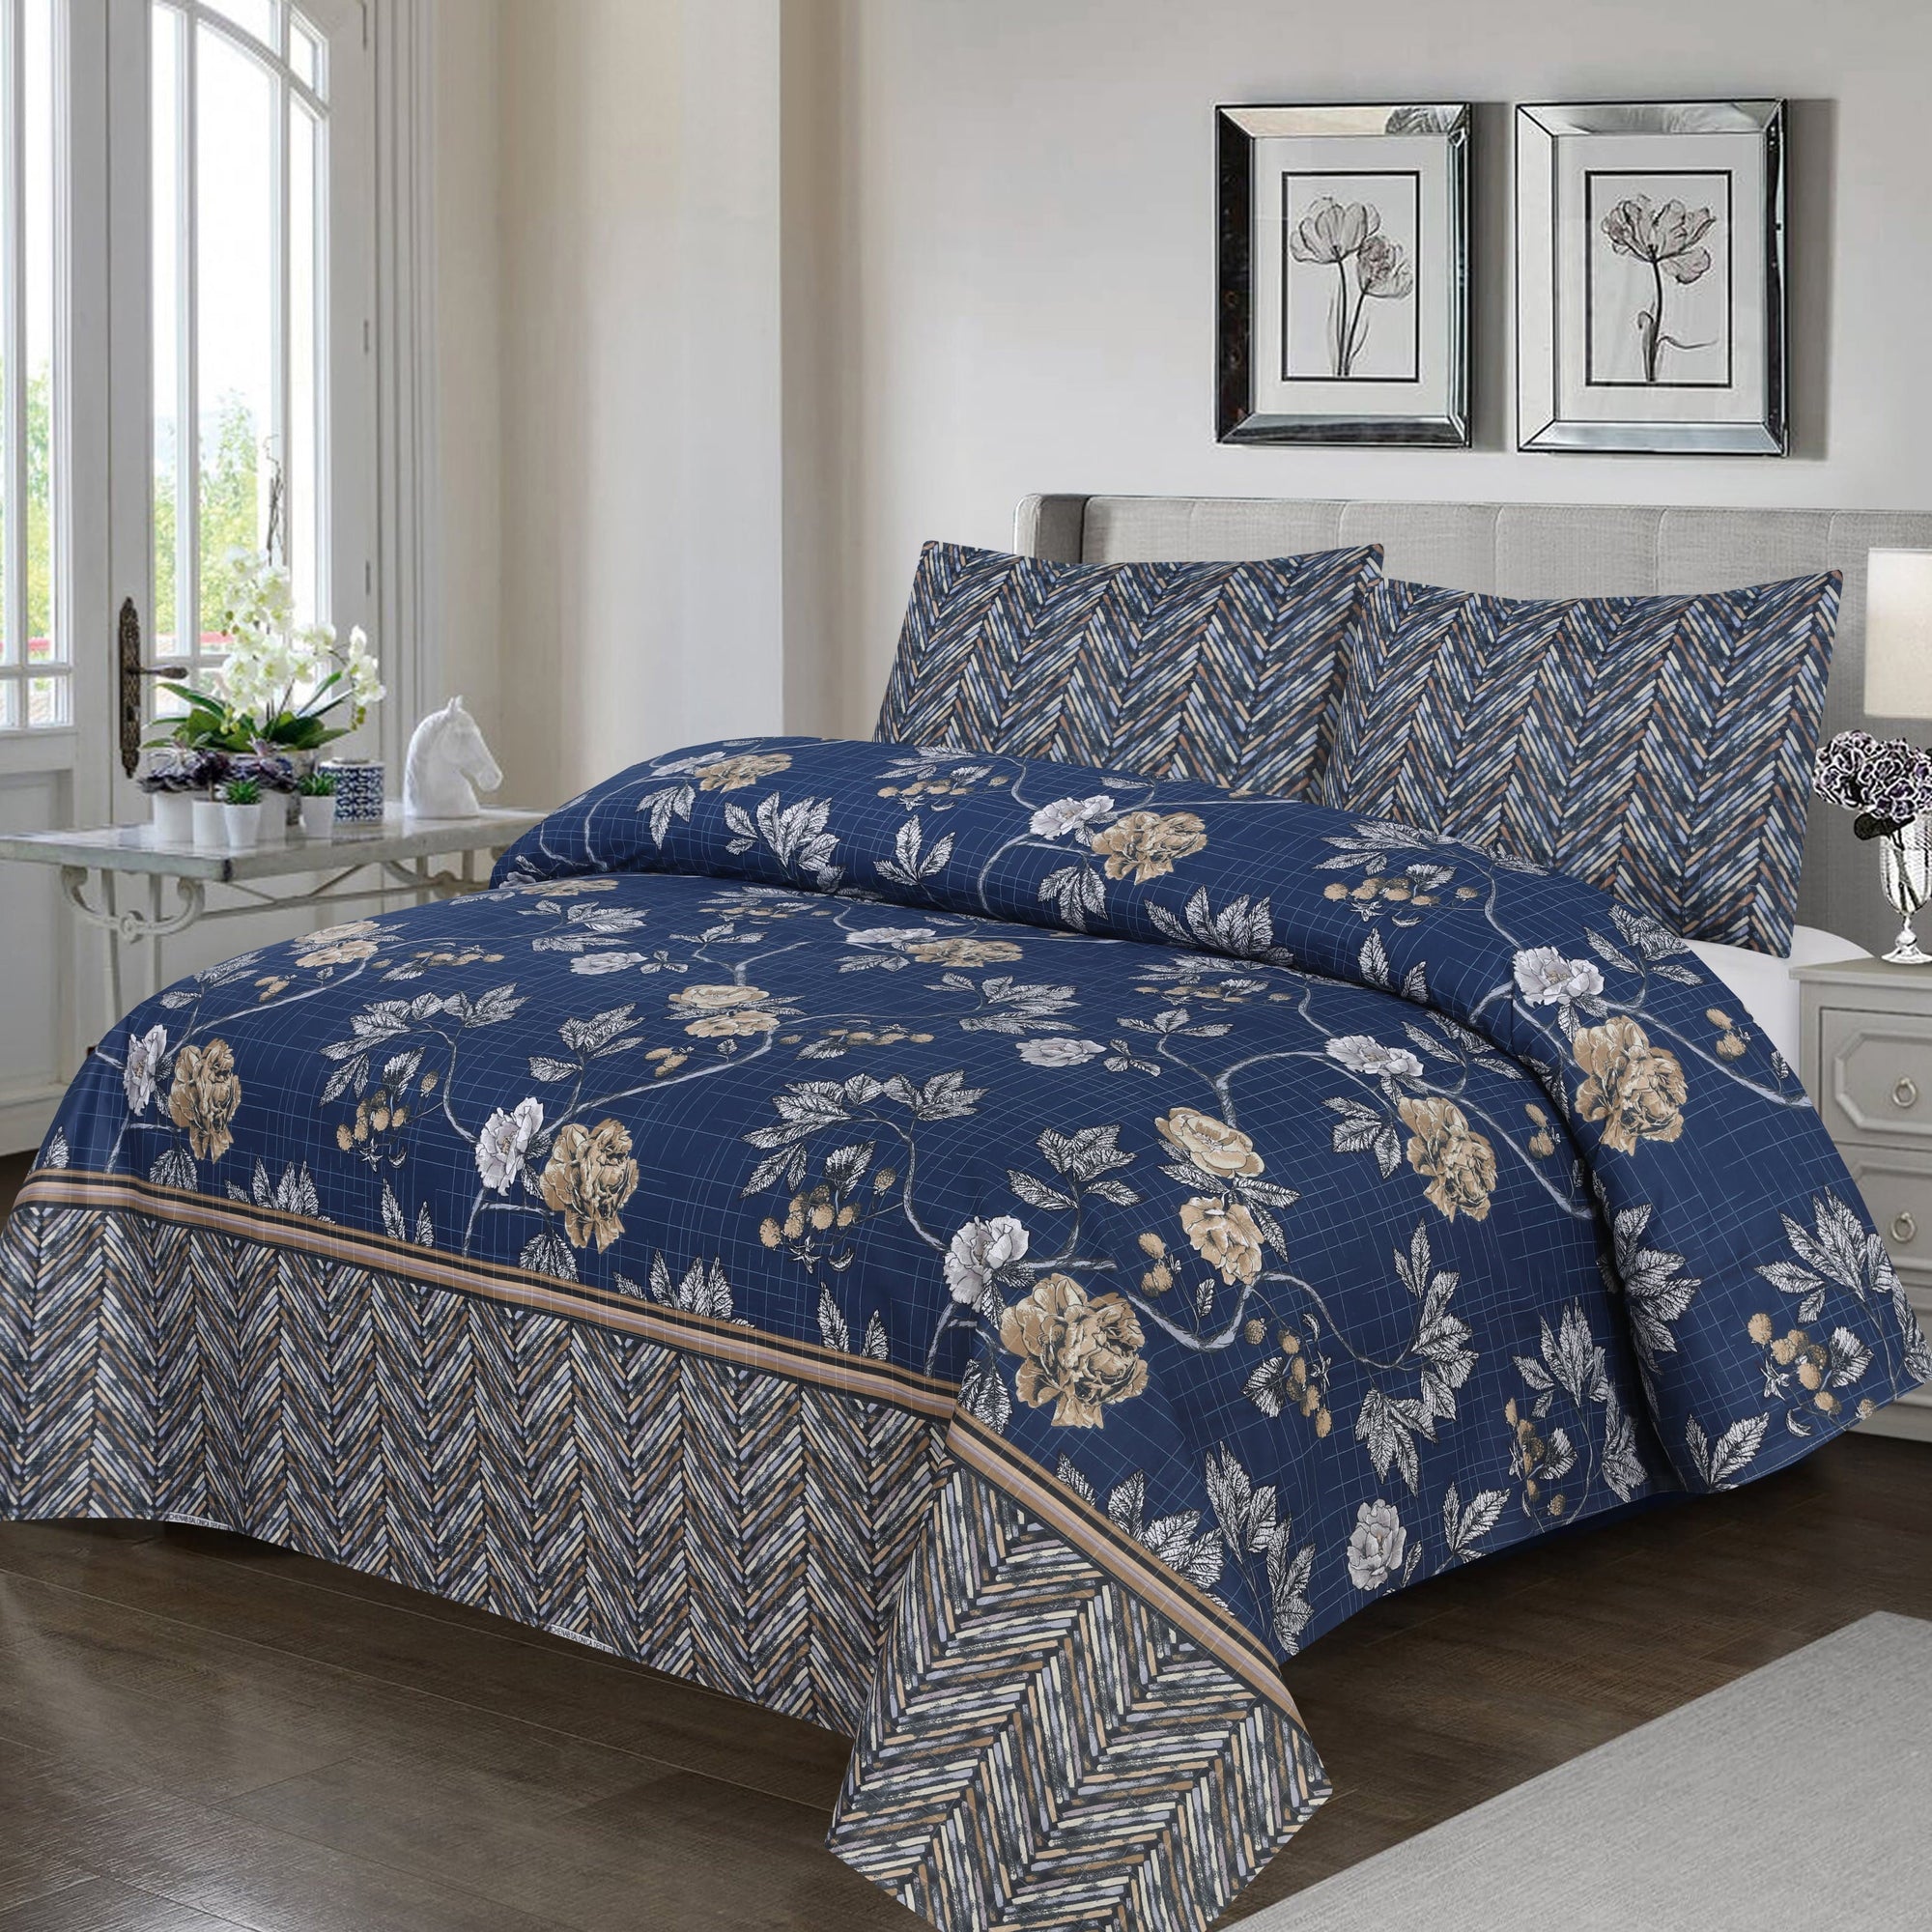 Grace D672-7 pc Comforter Set with 4 pillow covers